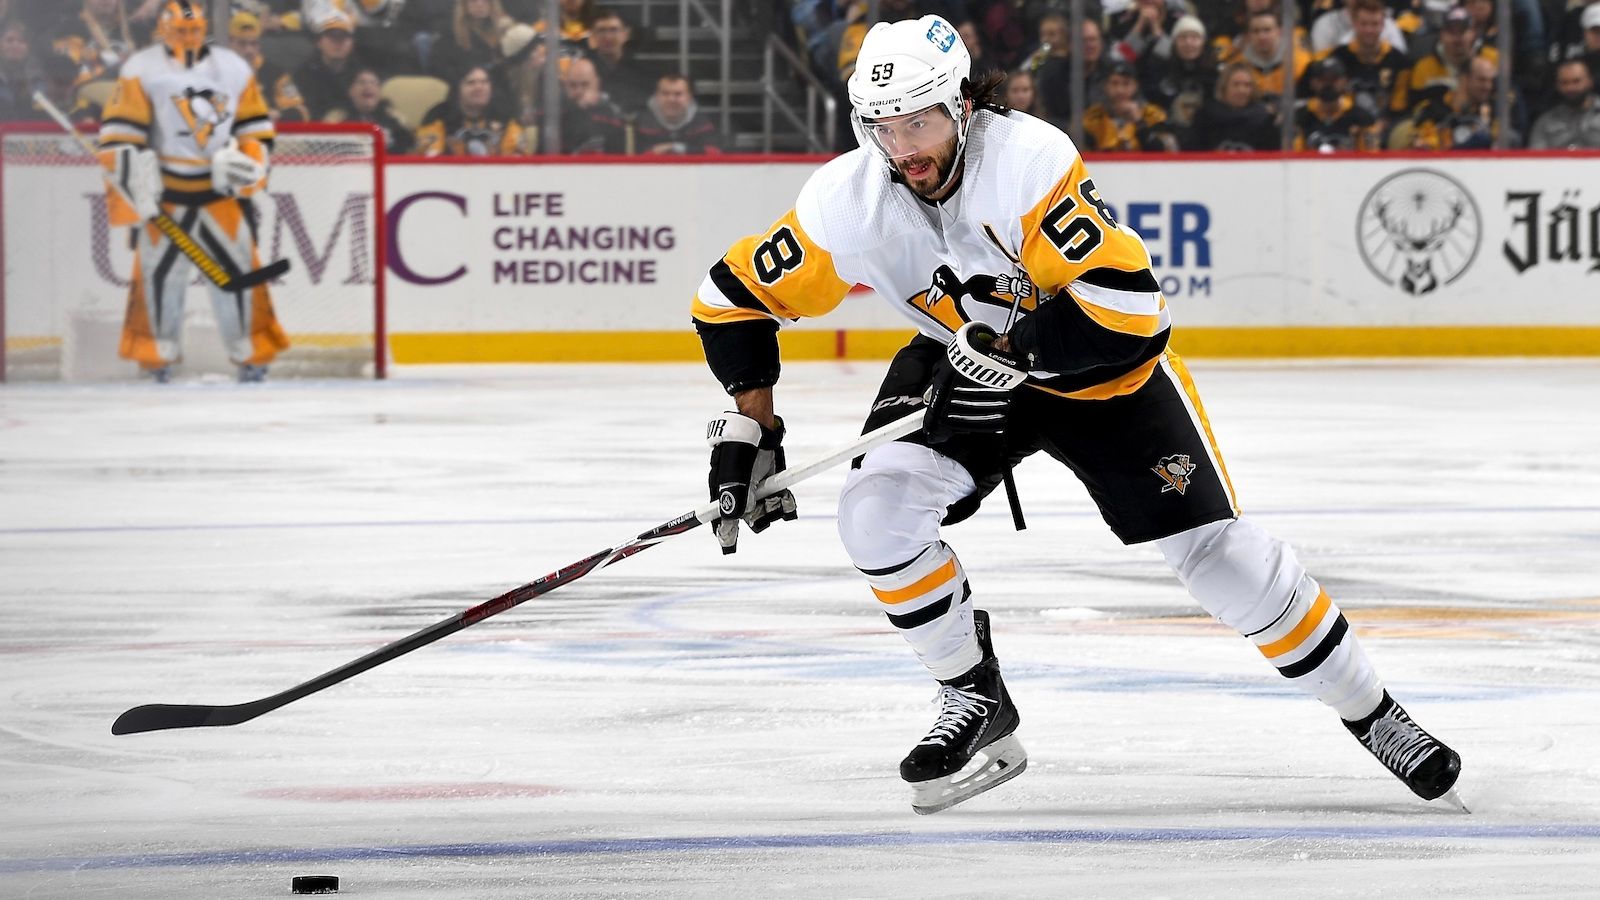 Penguins defenceman Kris Letang cleared to play 2 months after